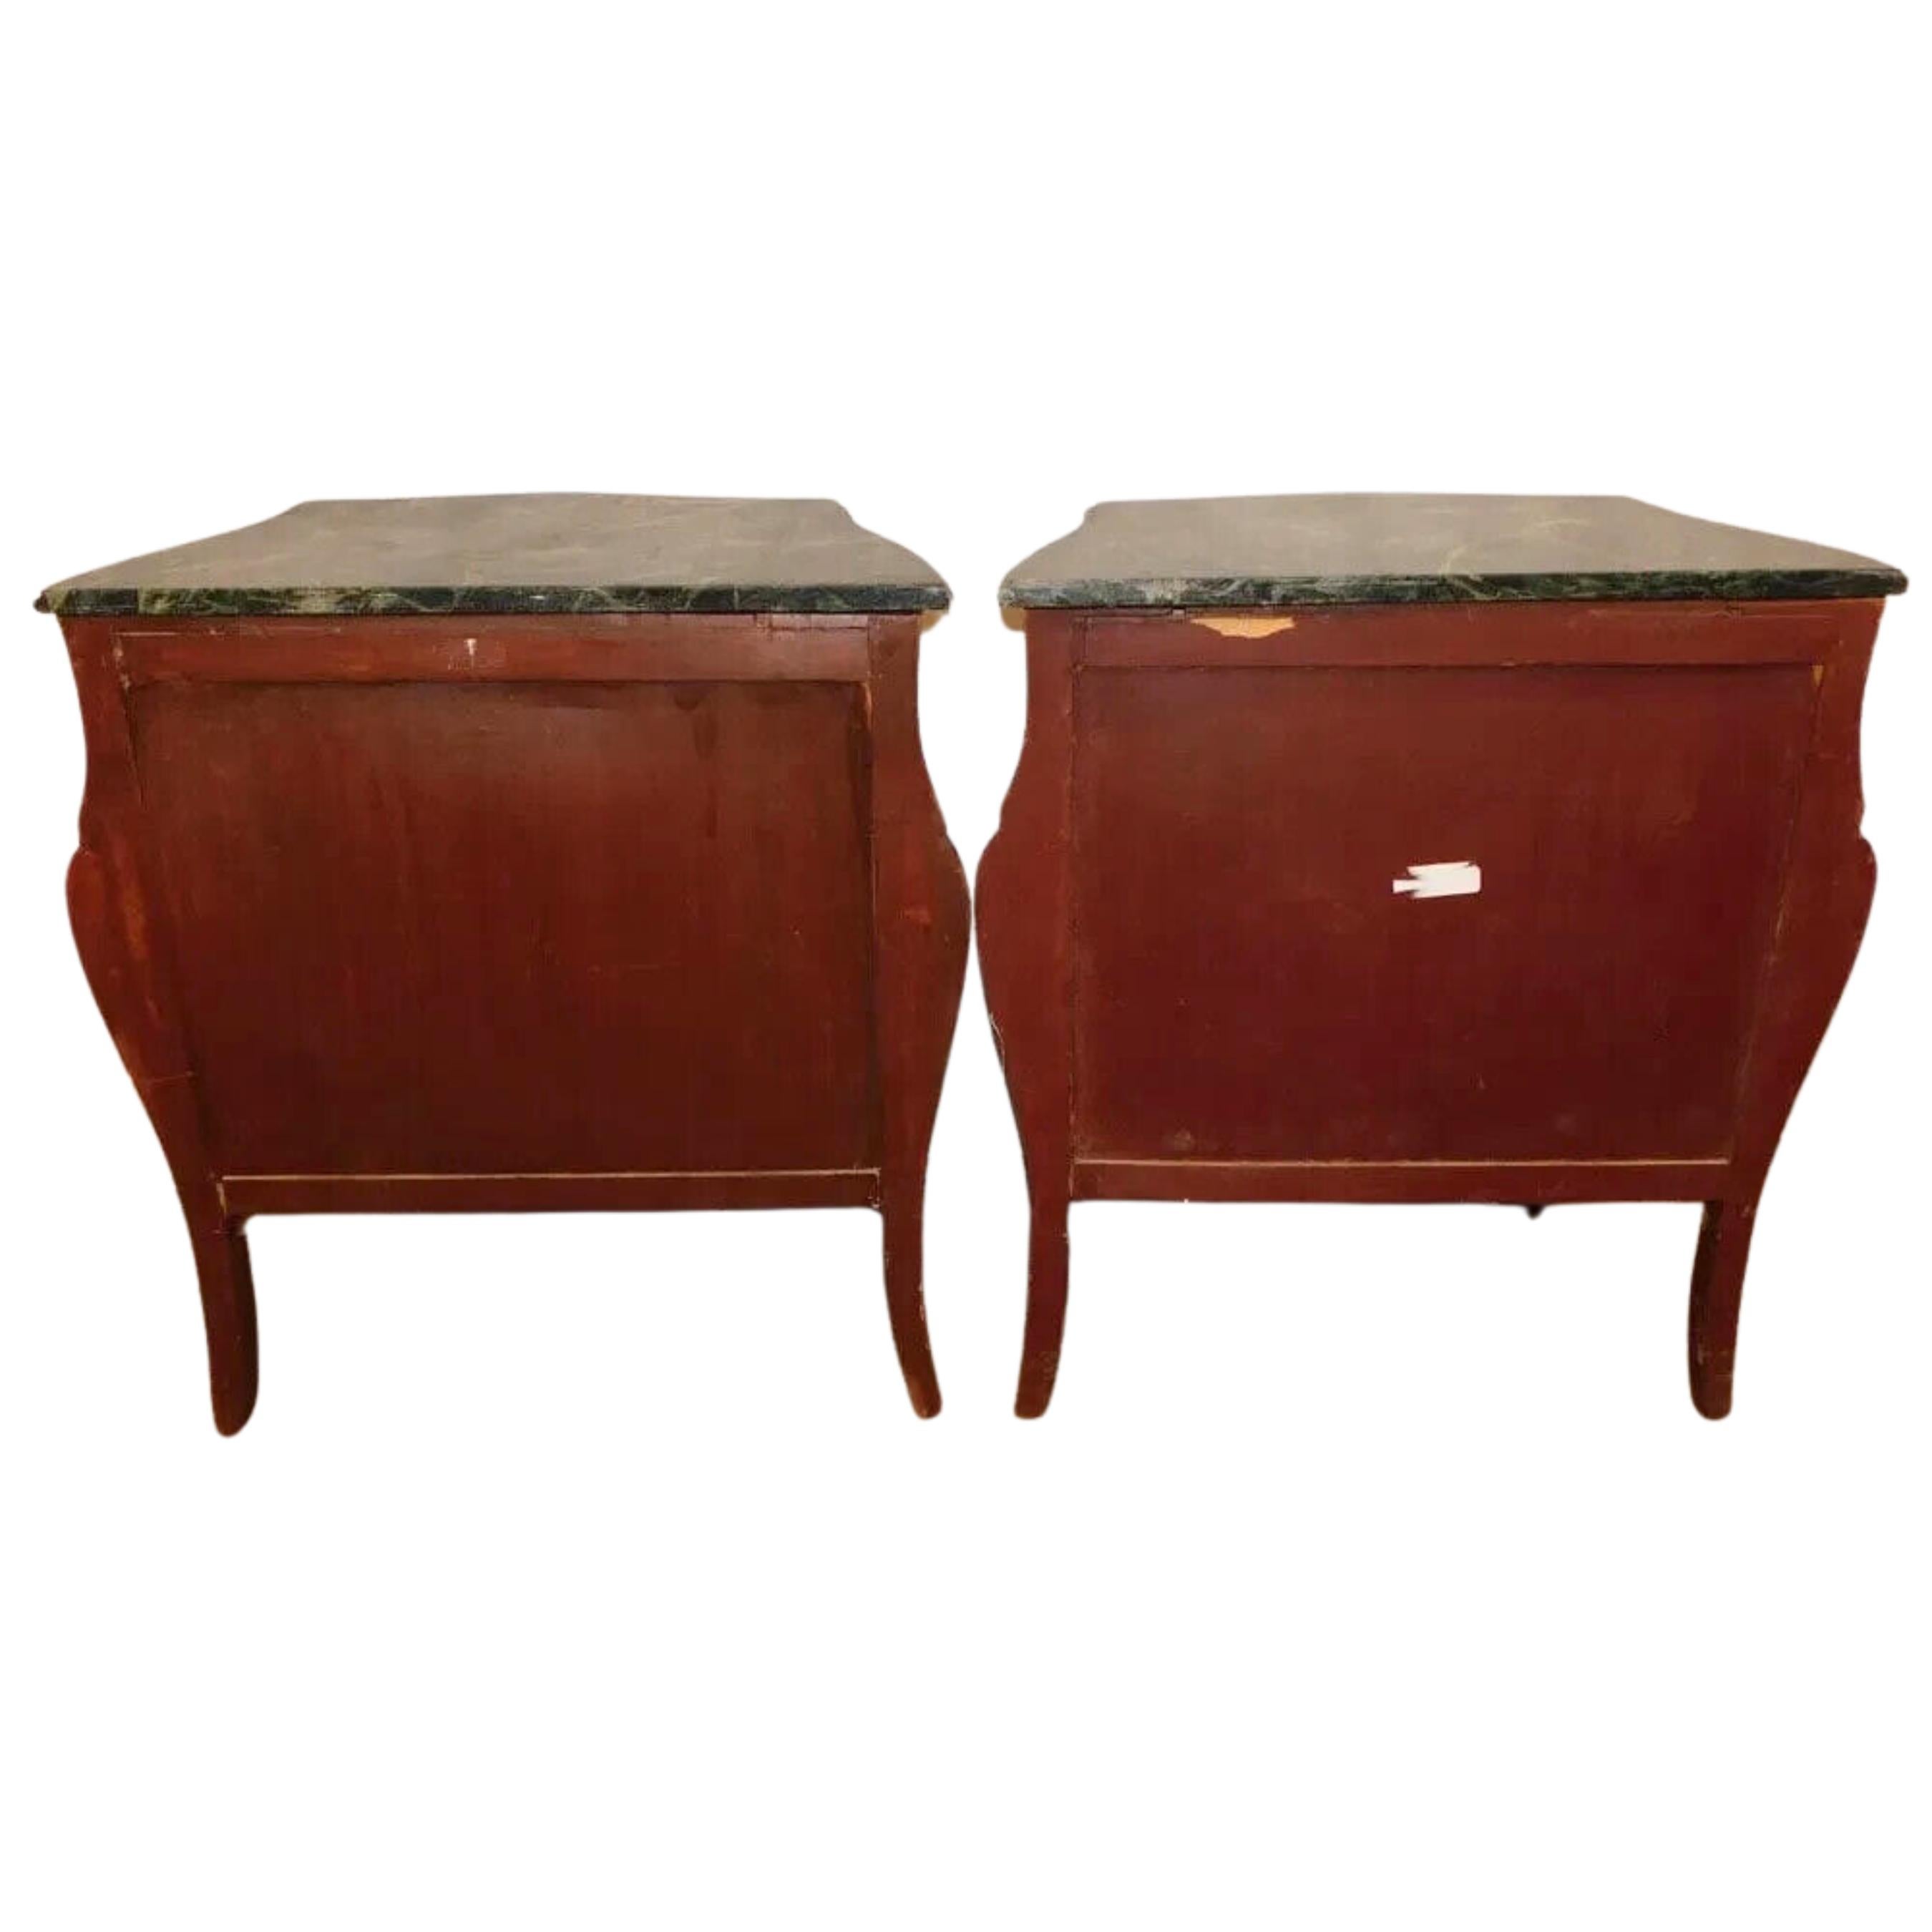 20th C. Walnut Inlay, Marble Top, Diminutive, With Bronze Commodes, Set of Two! 1